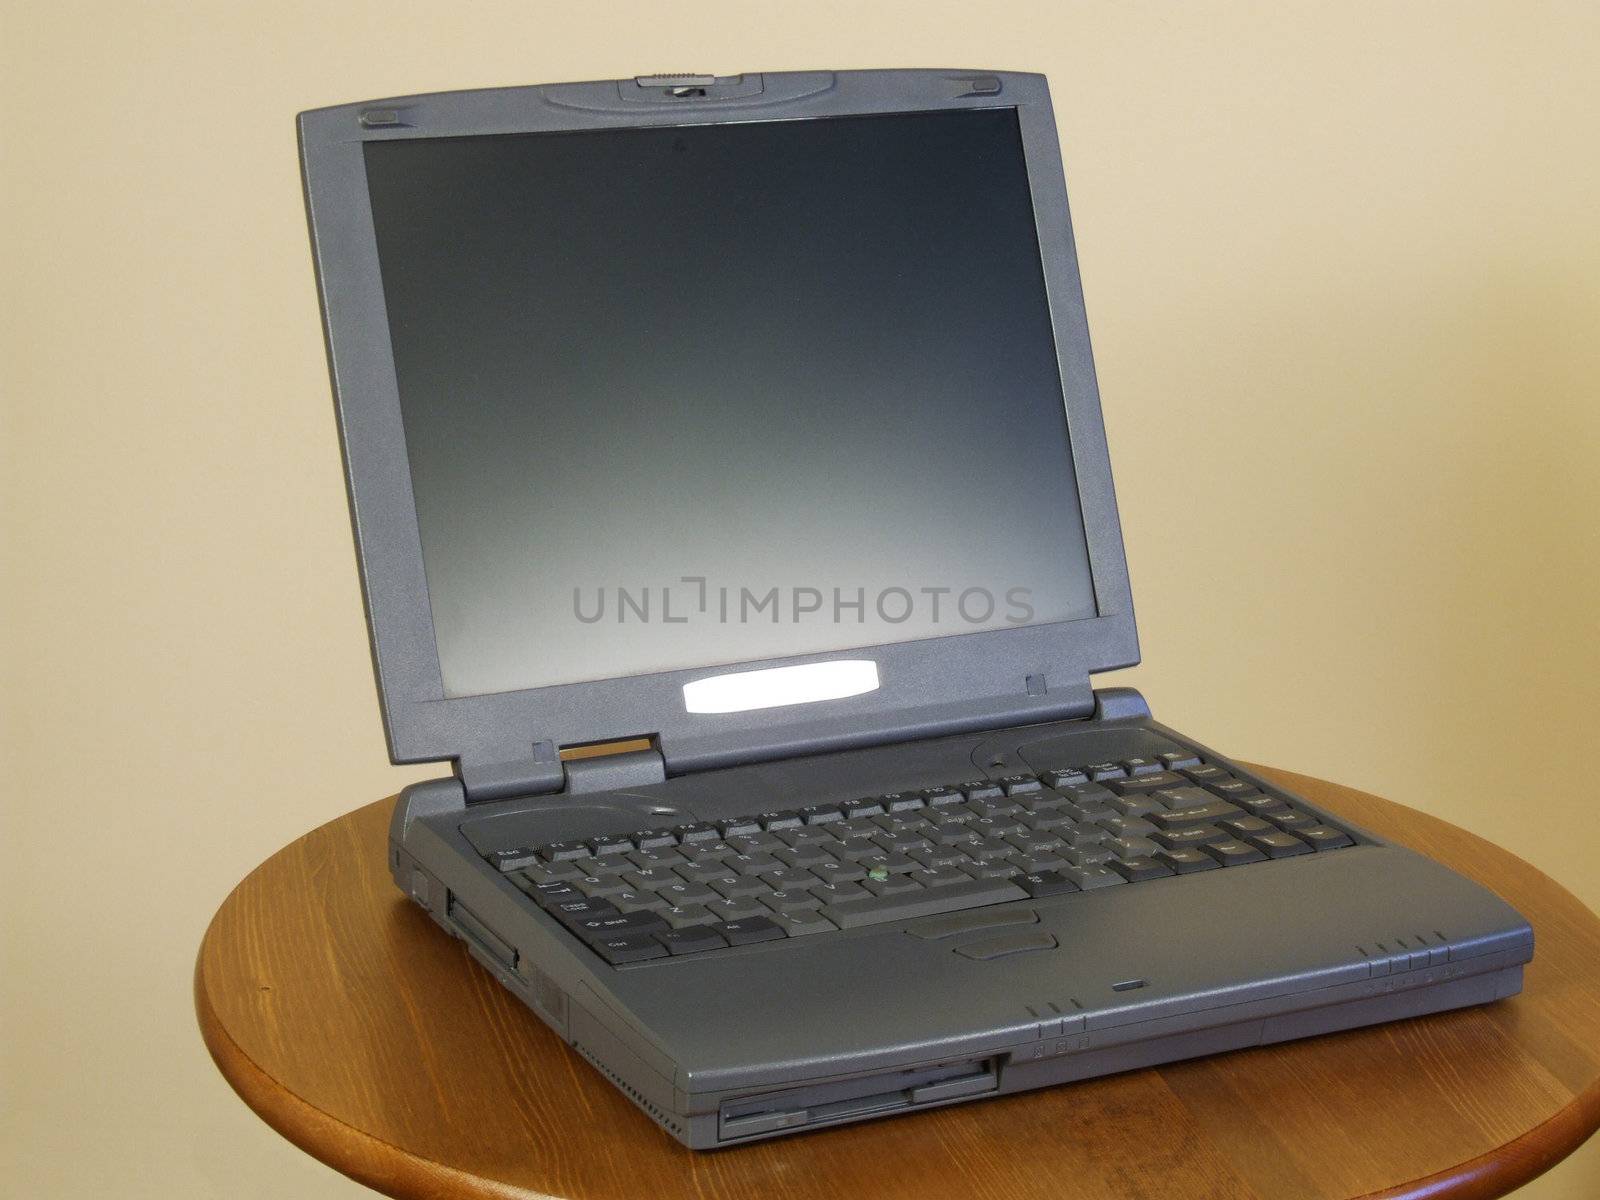 Typical notebook with silver screen. Computer on a table.